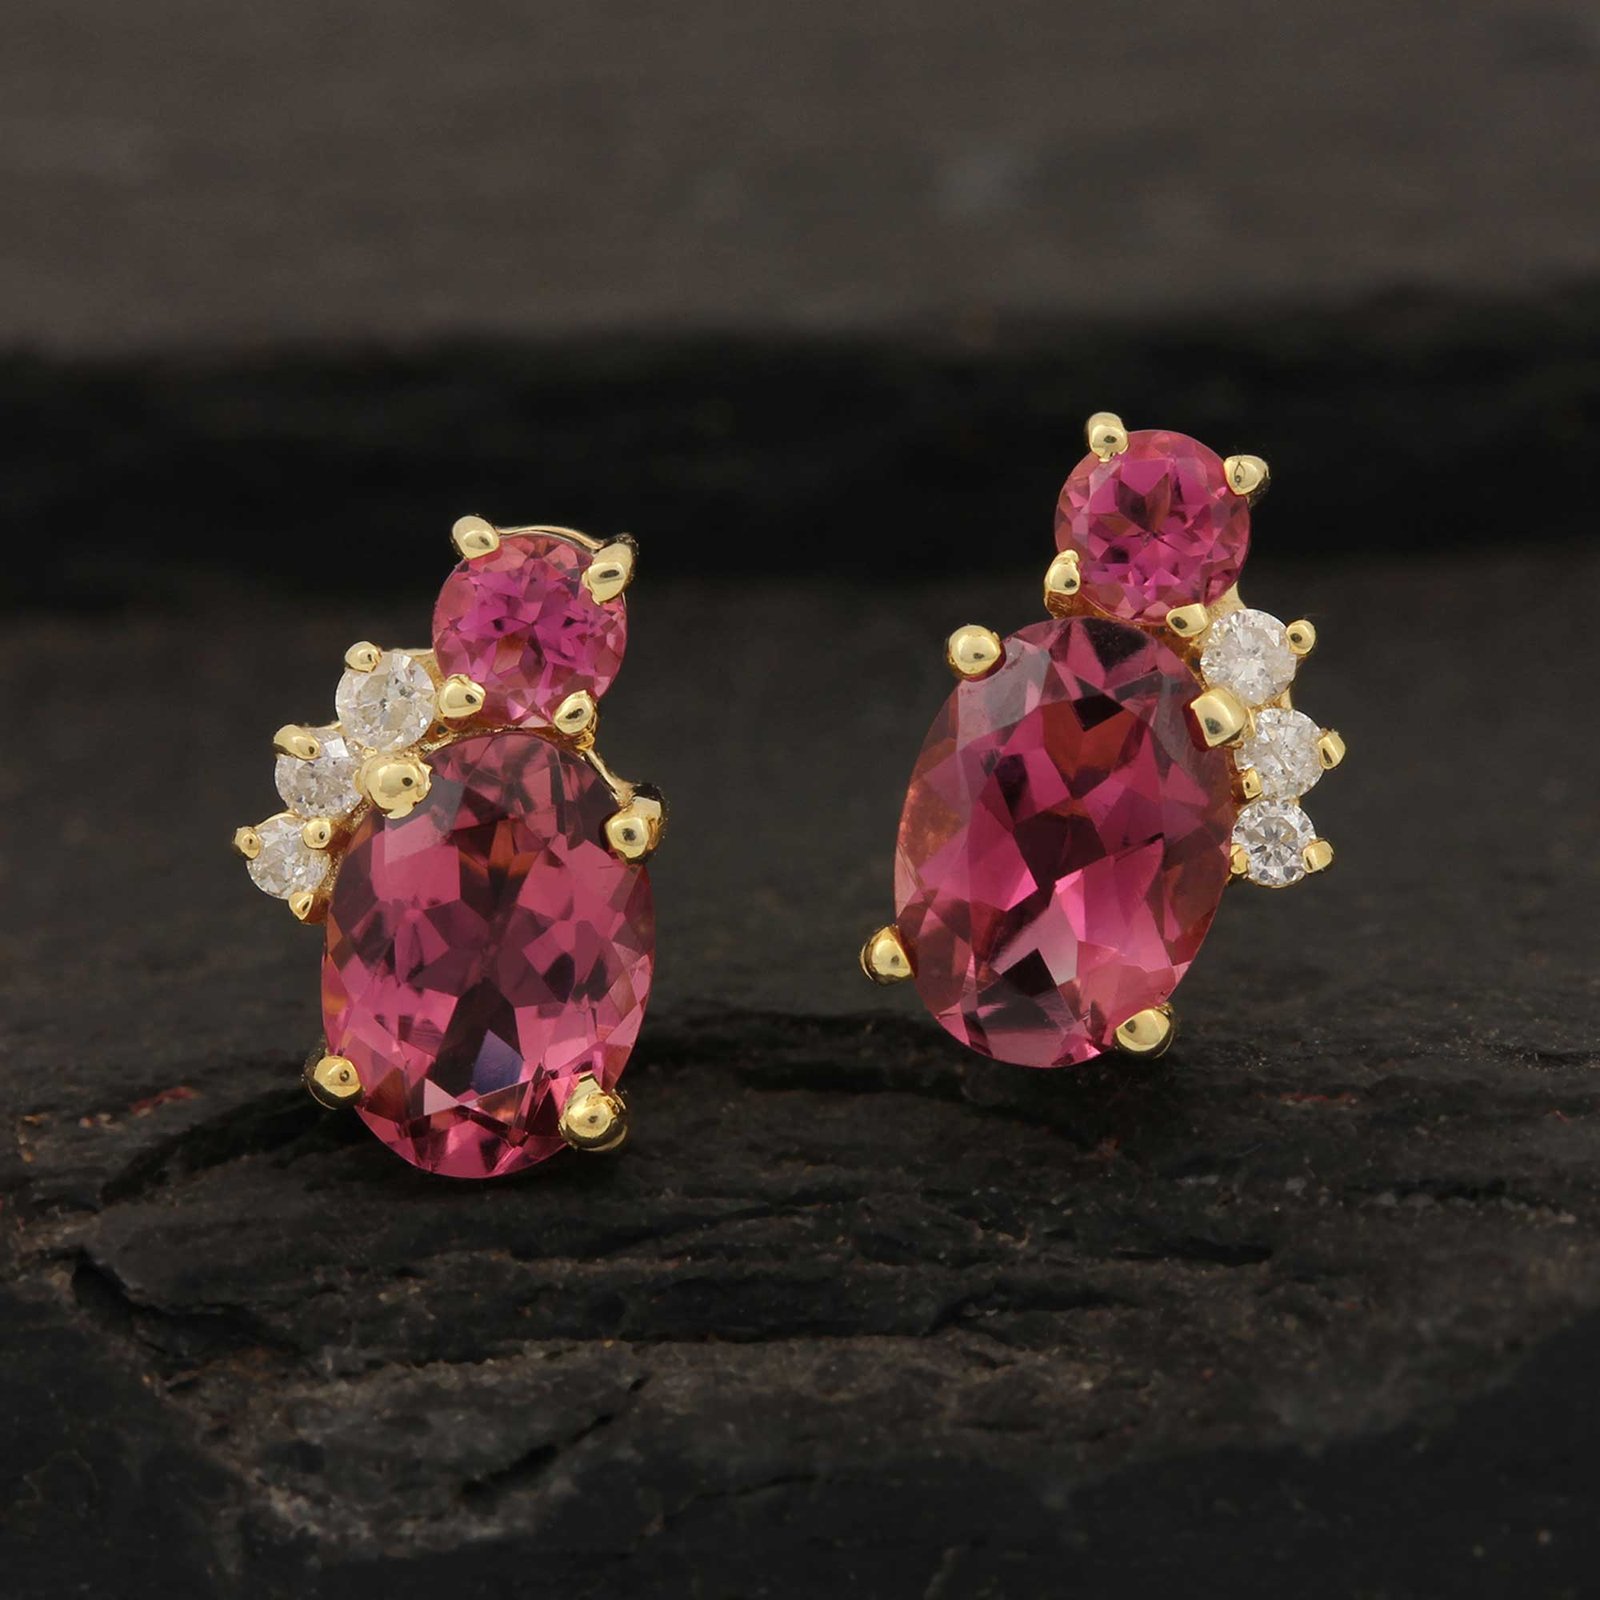 14k Solid Gold Stud Earrings Adorned With Diamond & Pink Tourmaline Gemstone